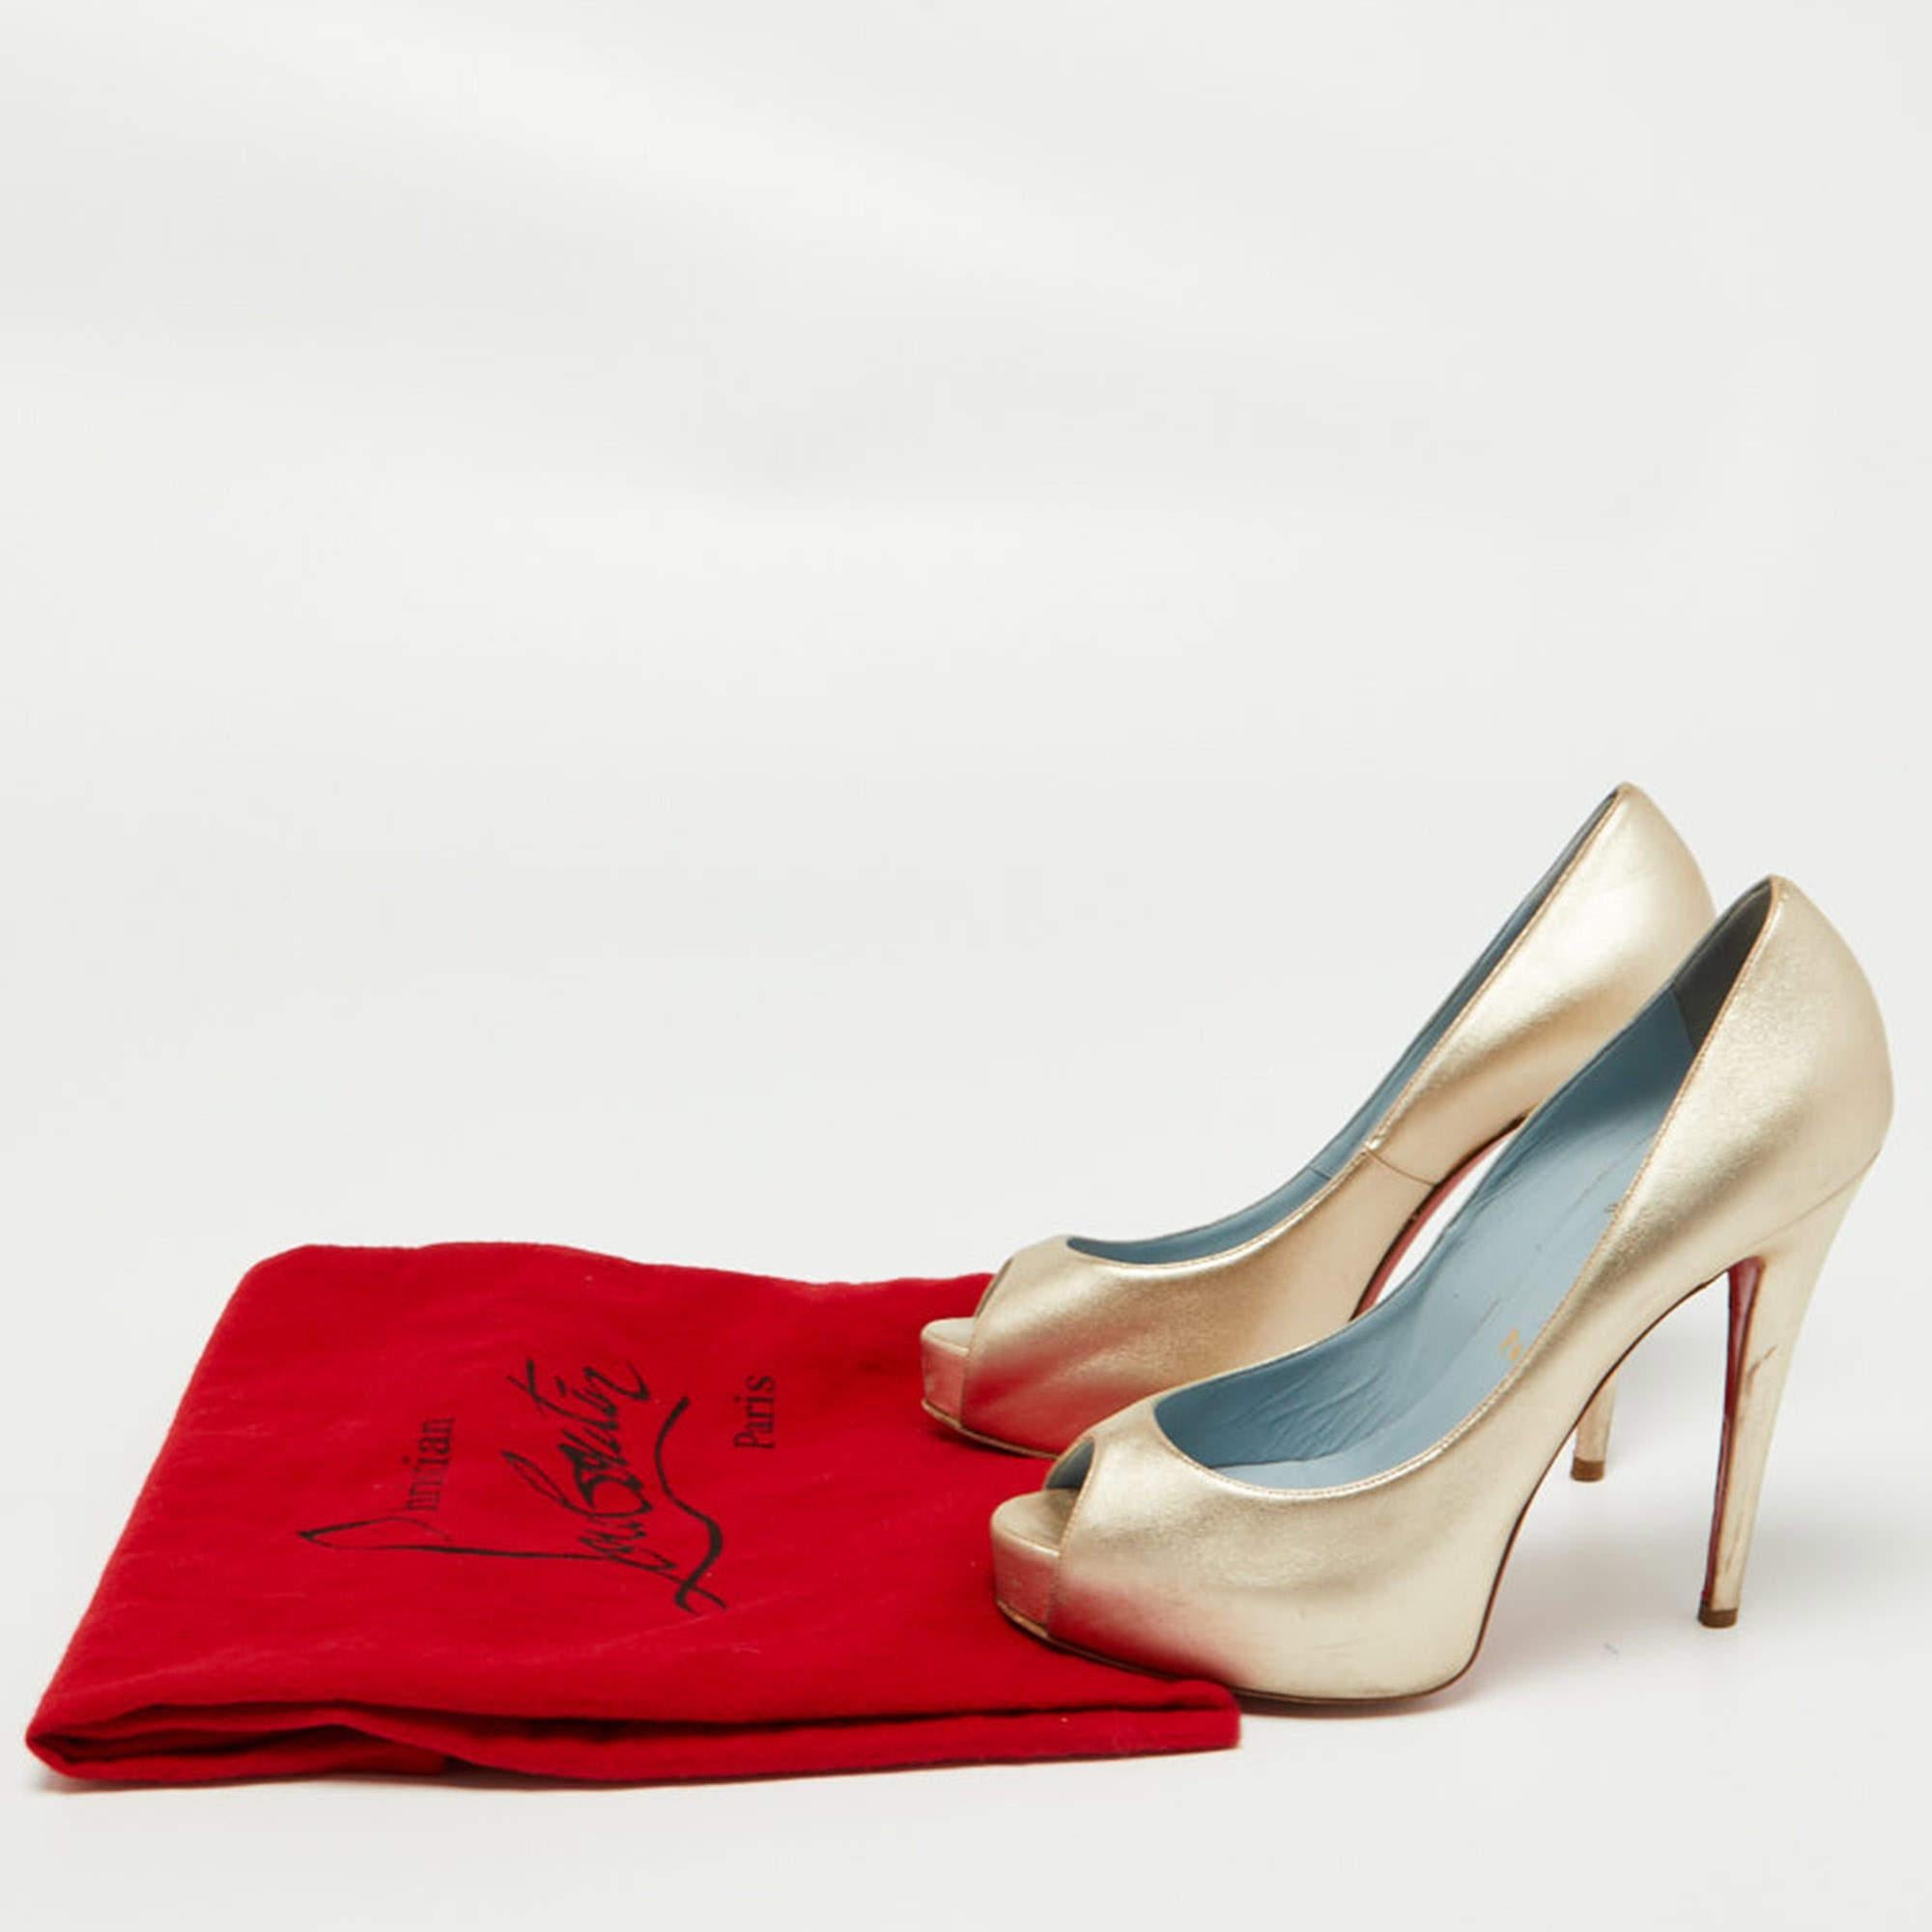 Christian Louboutin Gold Leather Very Prive Pumps Size 38.5 For Sale 6